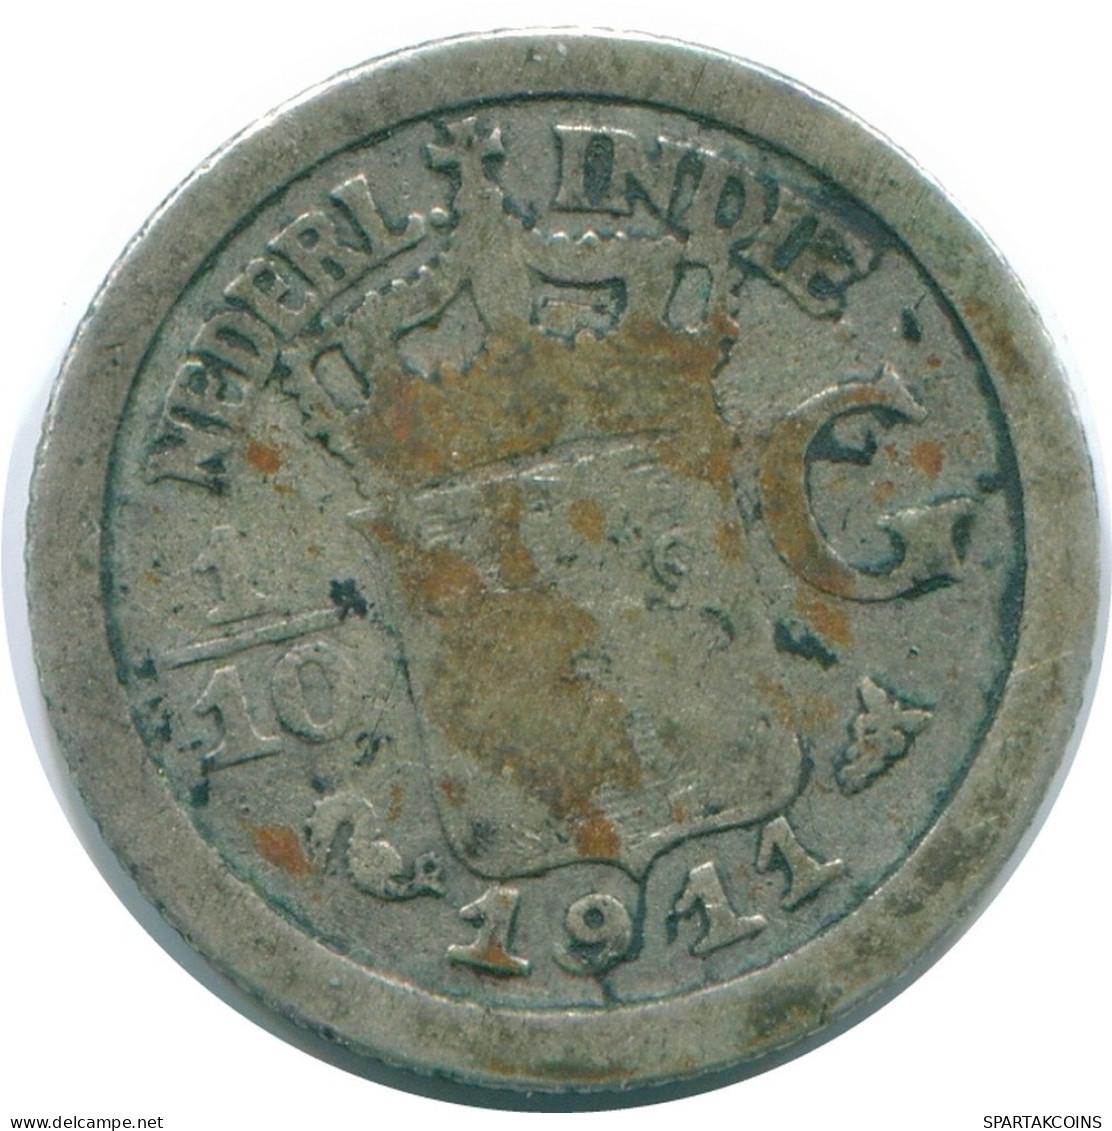 1/10 GULDEN 1911 NETHERLANDS EAST INDIES SILVER Colonial Coin #NL13251.3.U.A - Indes Neerlandesas